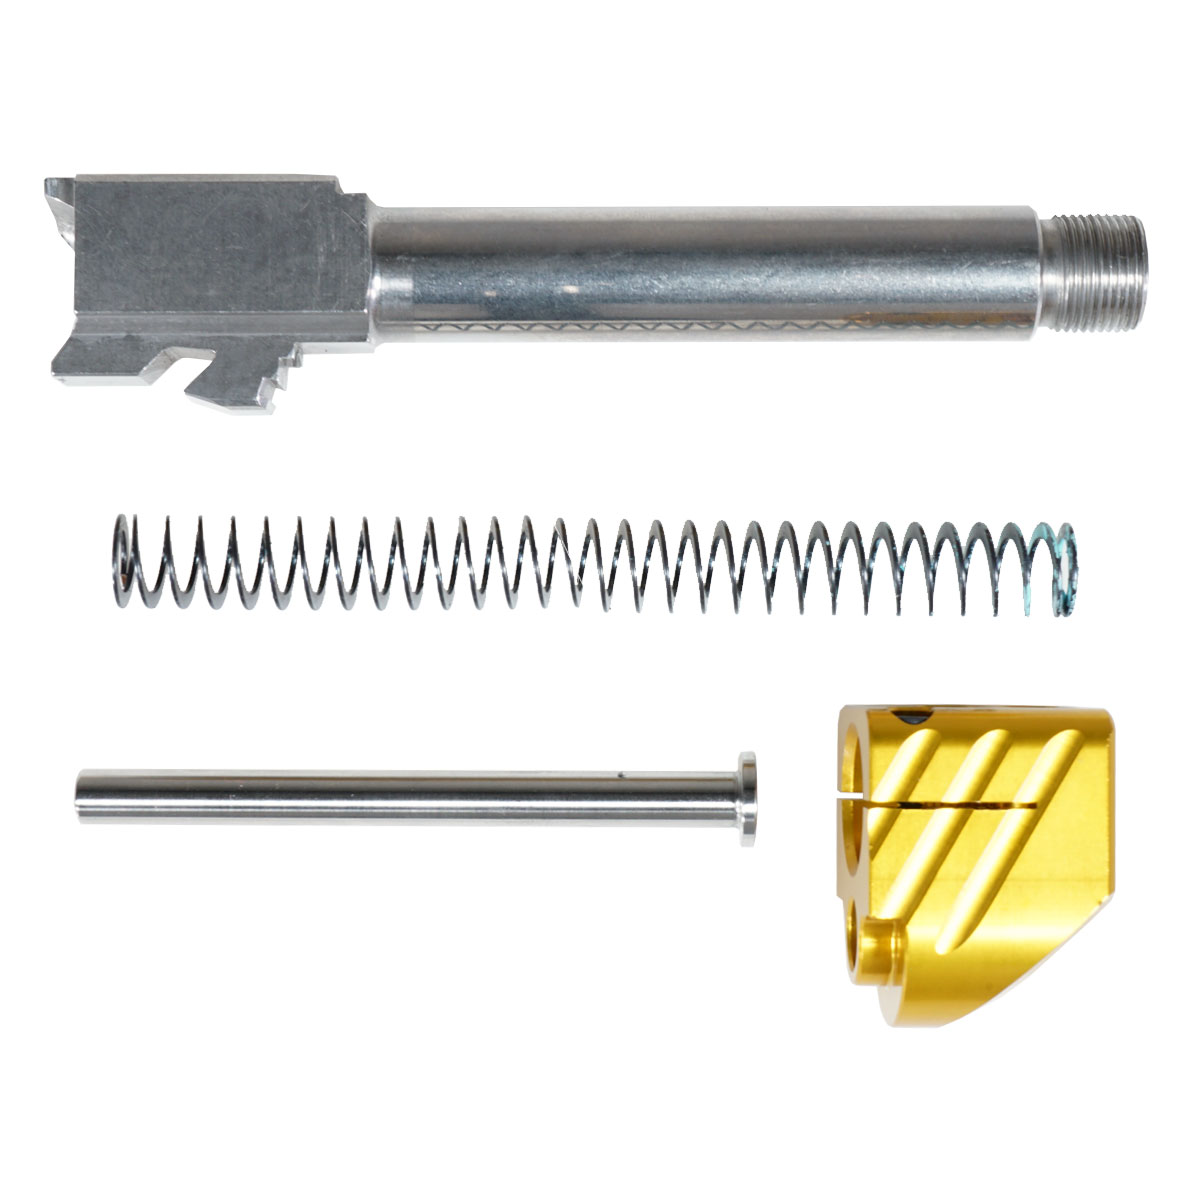 Upgrade Your Glock Kit: Davidson Defense Glock Compensator 6061 Aluminum, Anodized Type 2 Gold Single port comp 1/2x28 with clamping set screws  + ELD Performance Glock 19 Compatible 9mm Stainless Steel Threaded Barrel